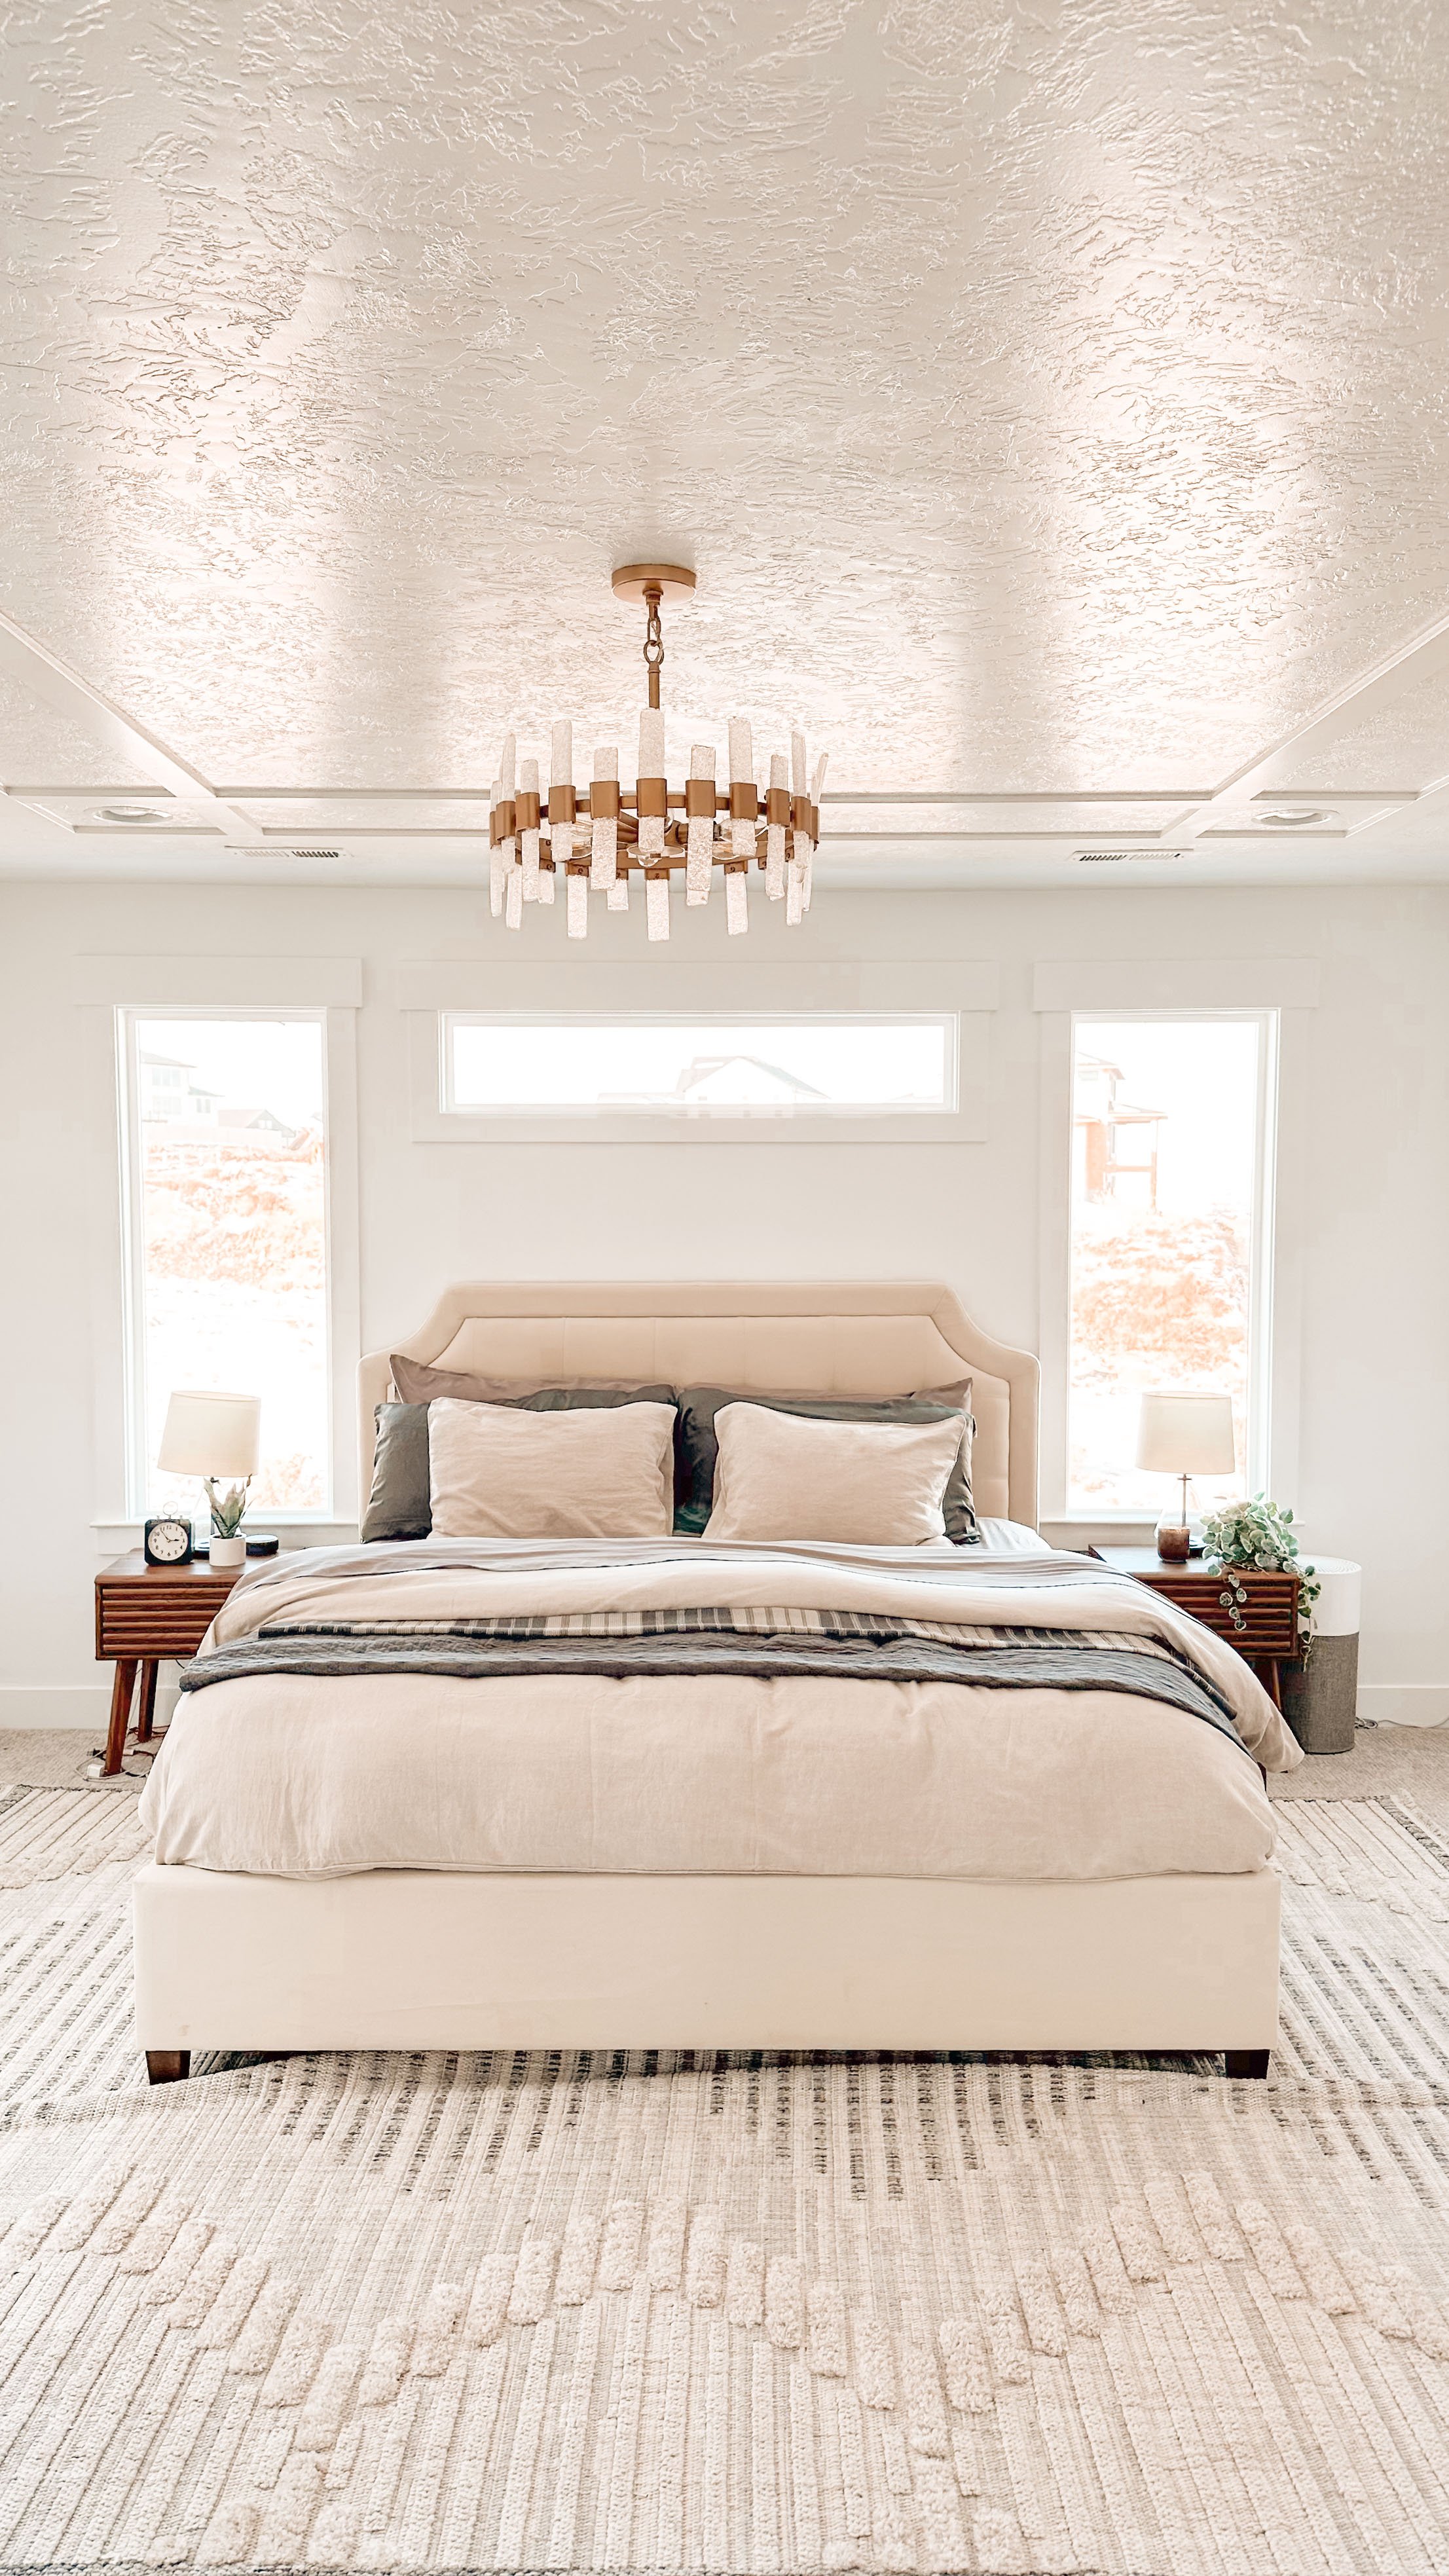 Moody Bedroom Bedding Refresh with Cariloha